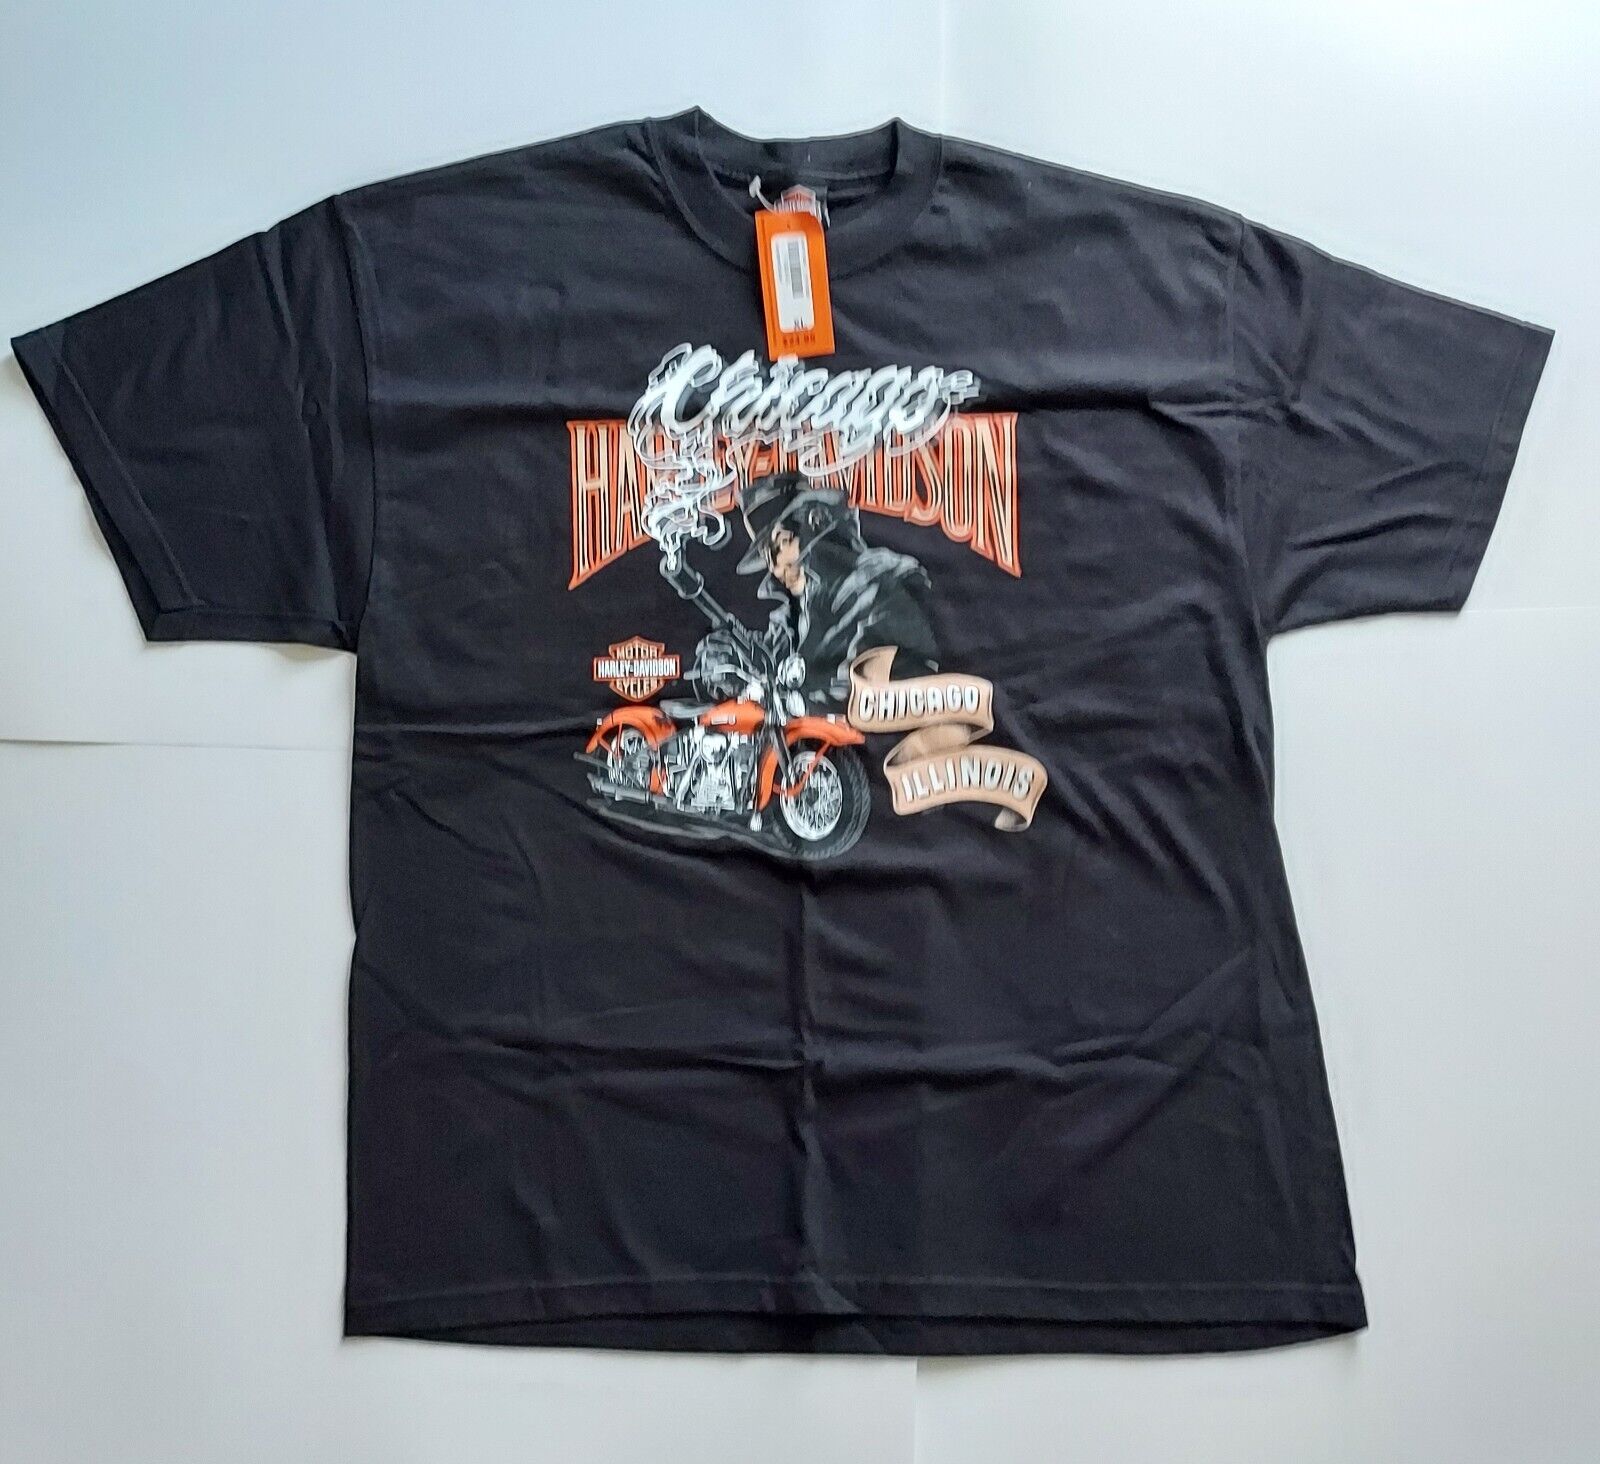 New With Tags 2005 Gangster Harley Davidson T-Shirt Size XL Chicago Illinois 